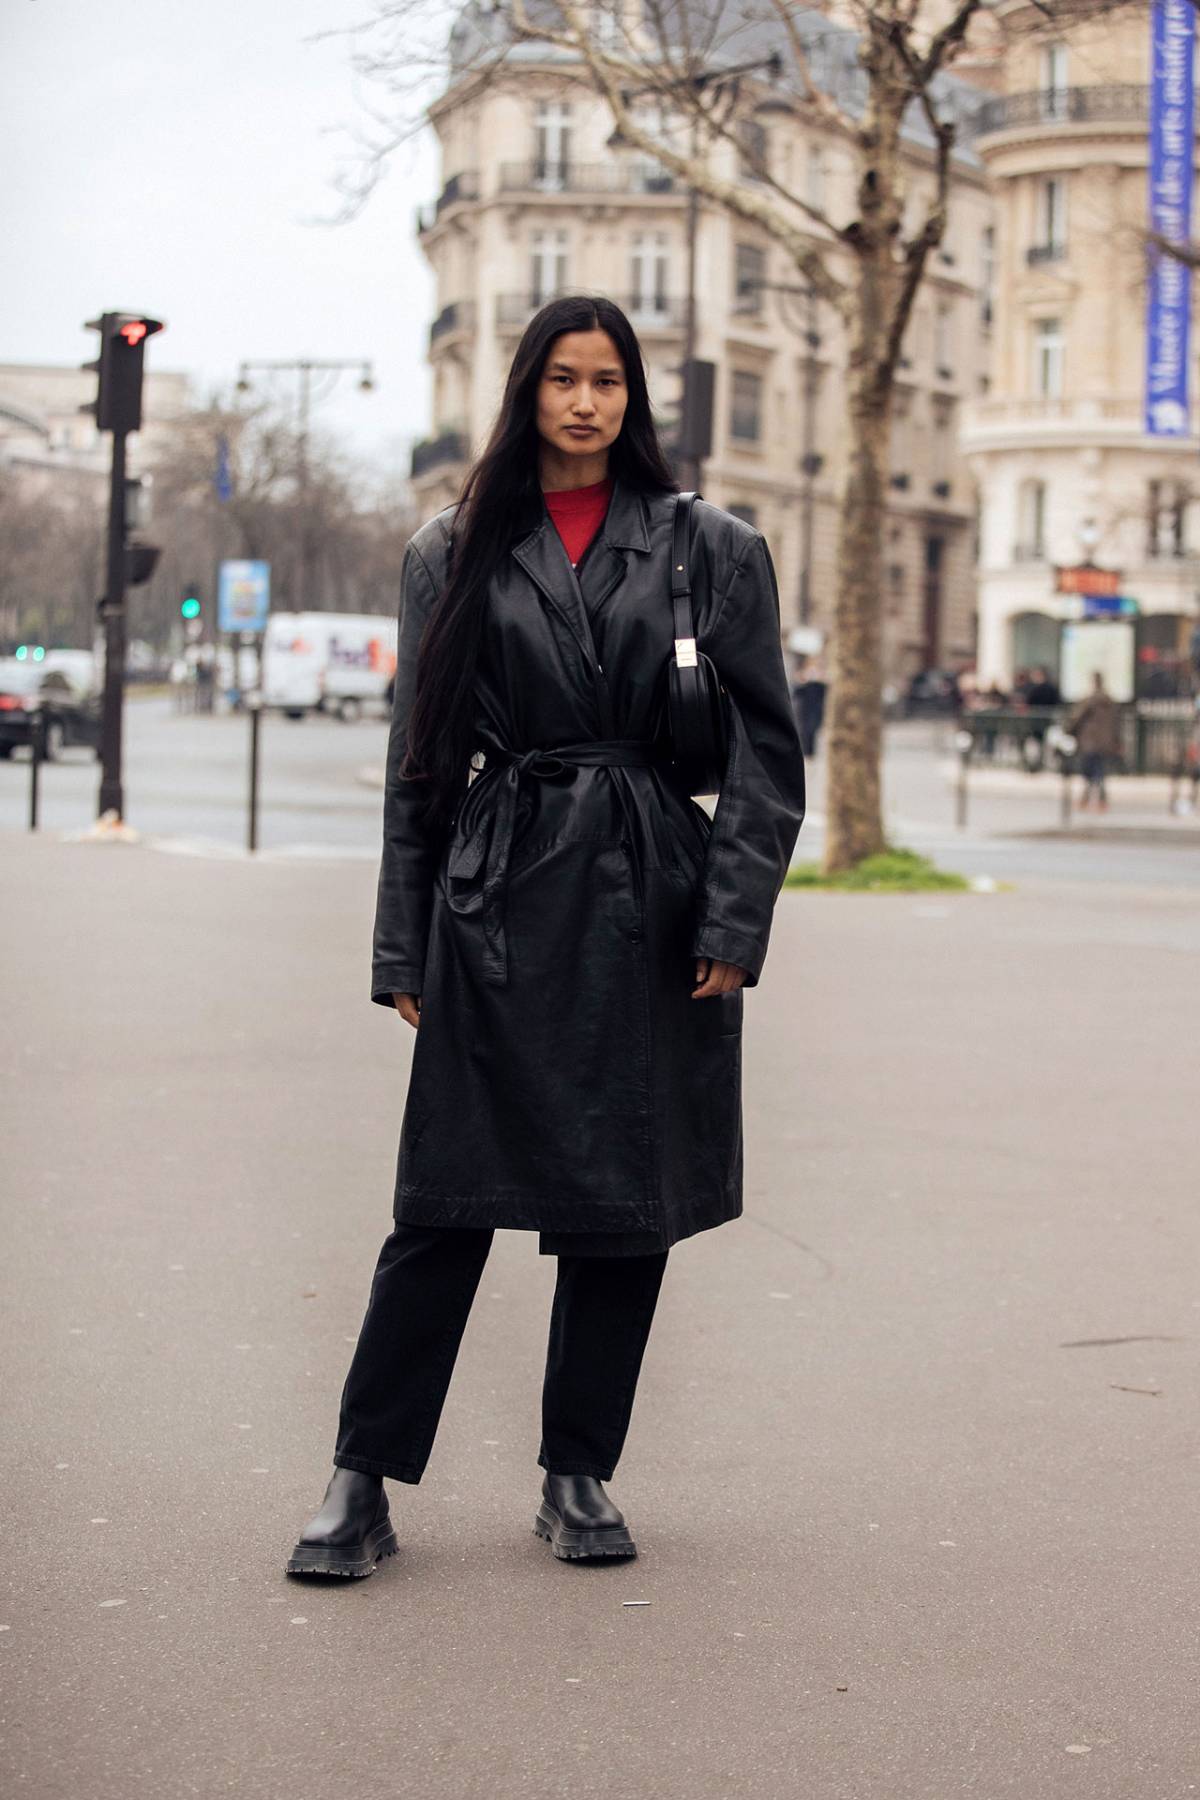 Varsha Thapa Street Style Fall-Winter 2022 by Melodie Jeng